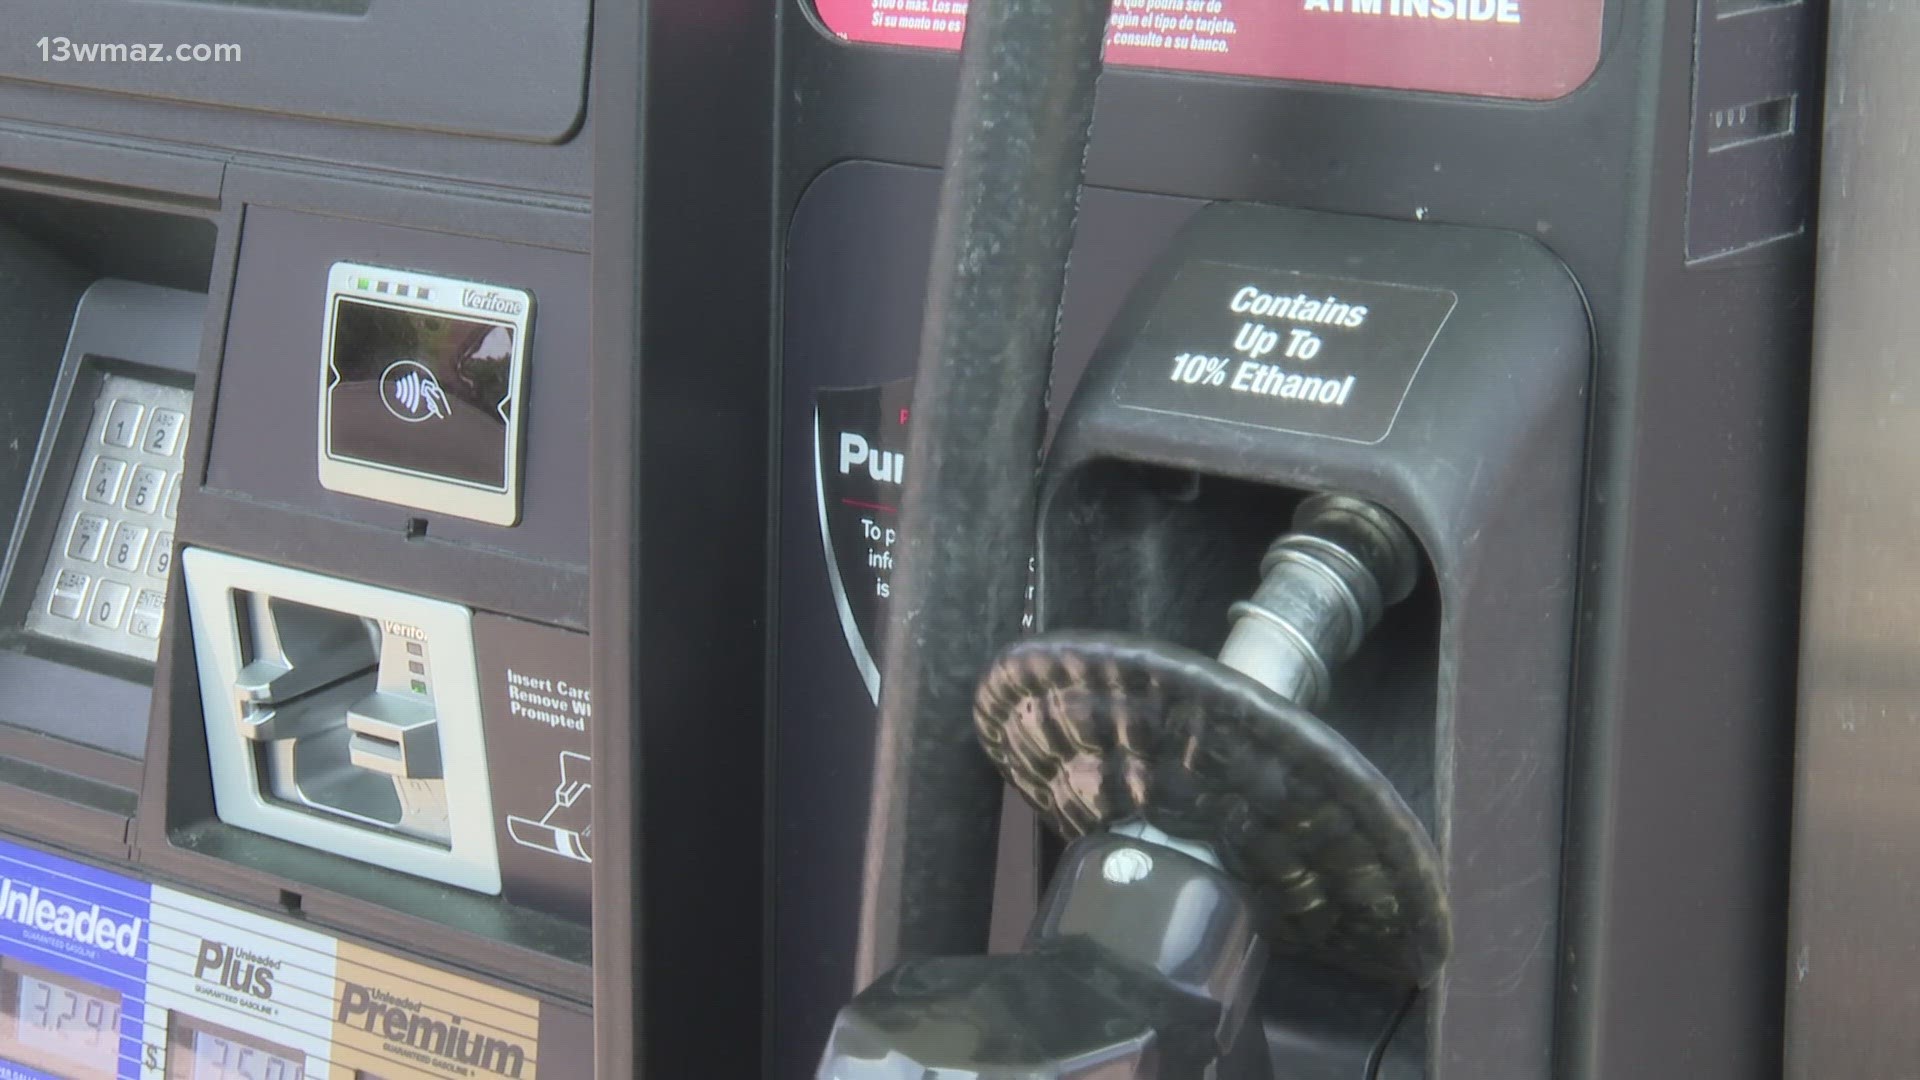 The average price of gas in the metro Macon area has decreased again after the tax suspension.